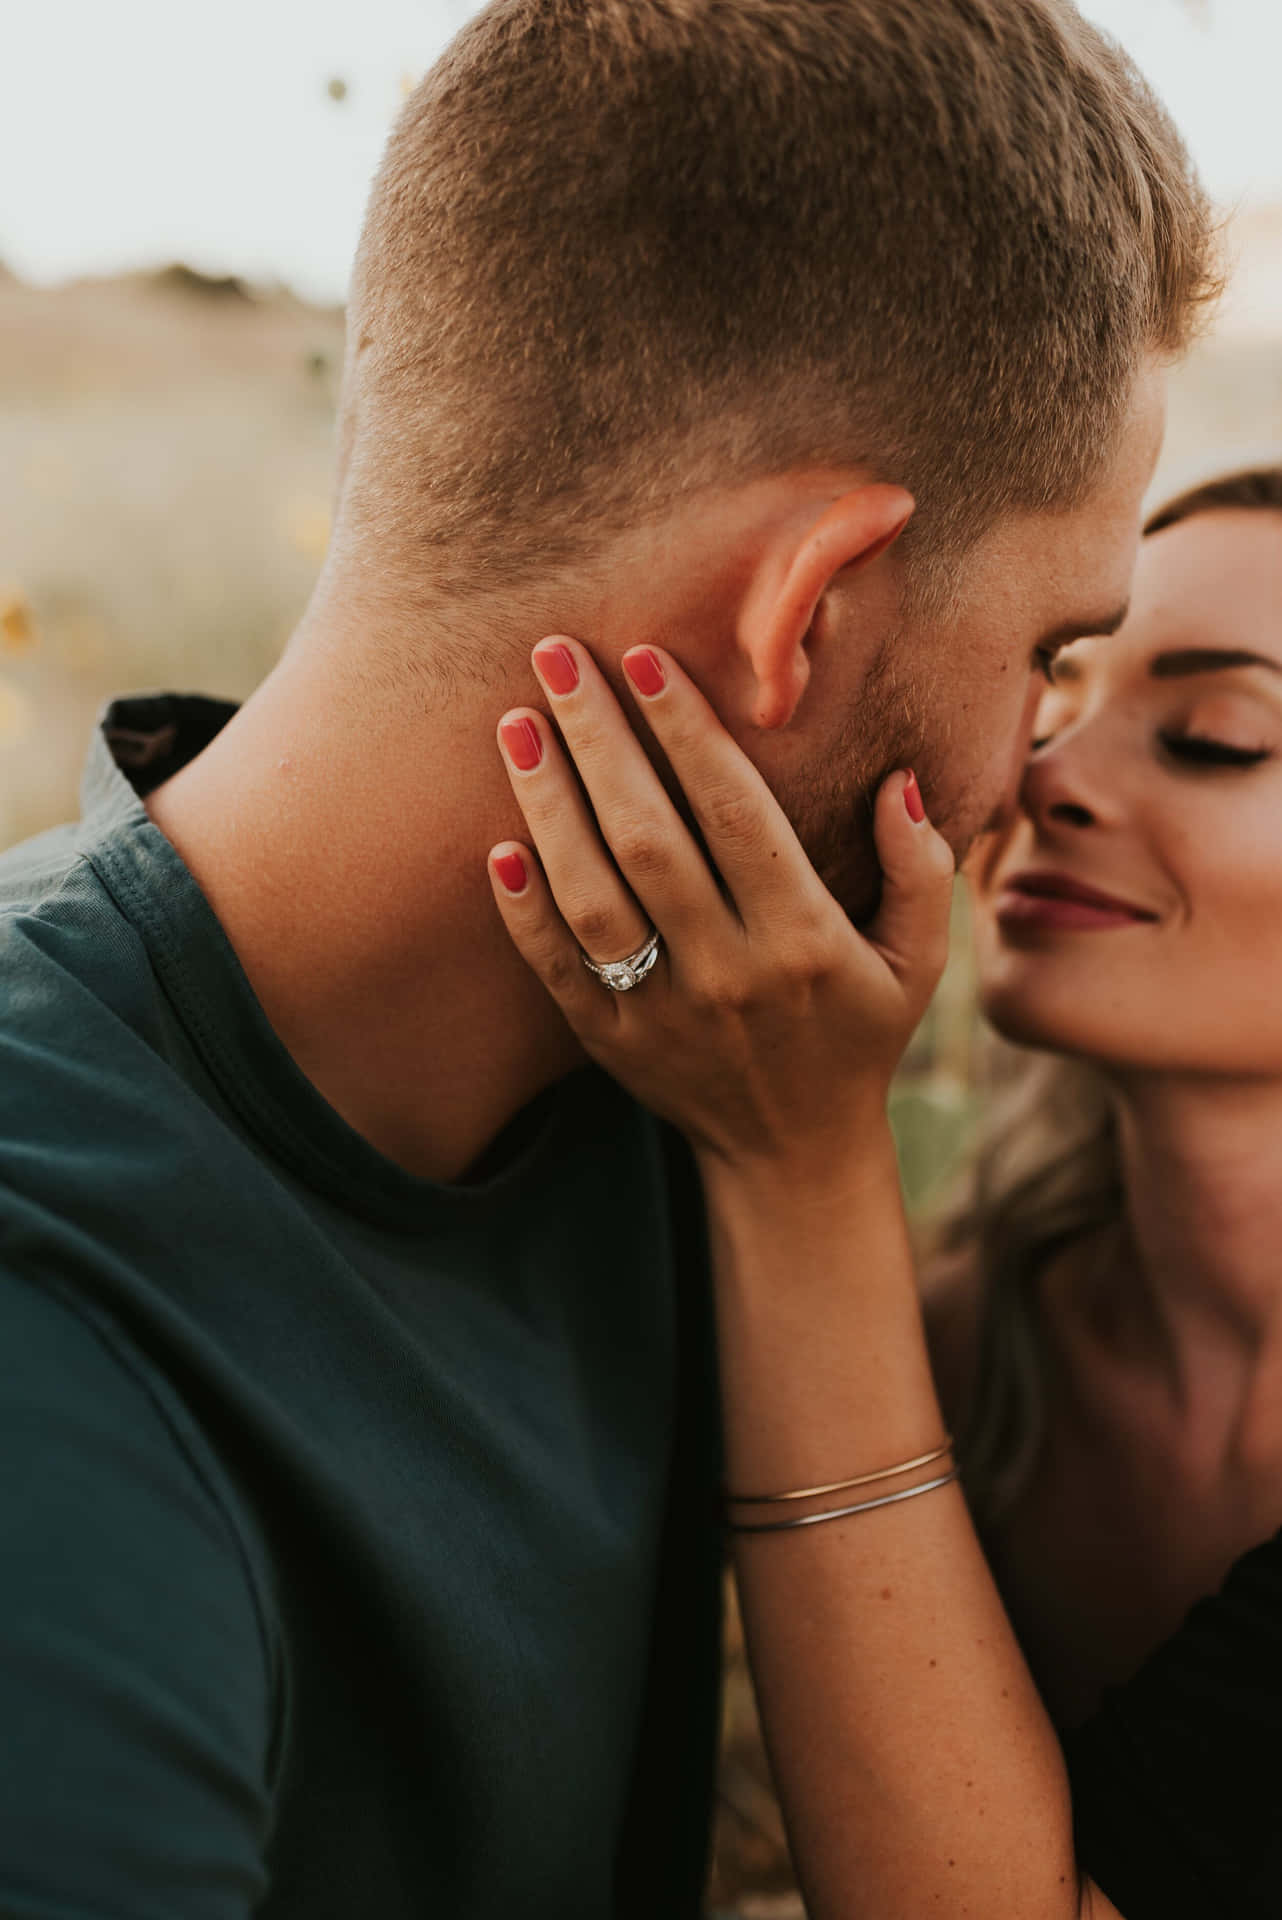 Engagement Ring Woman Cupping Man's Cheeks Pictures